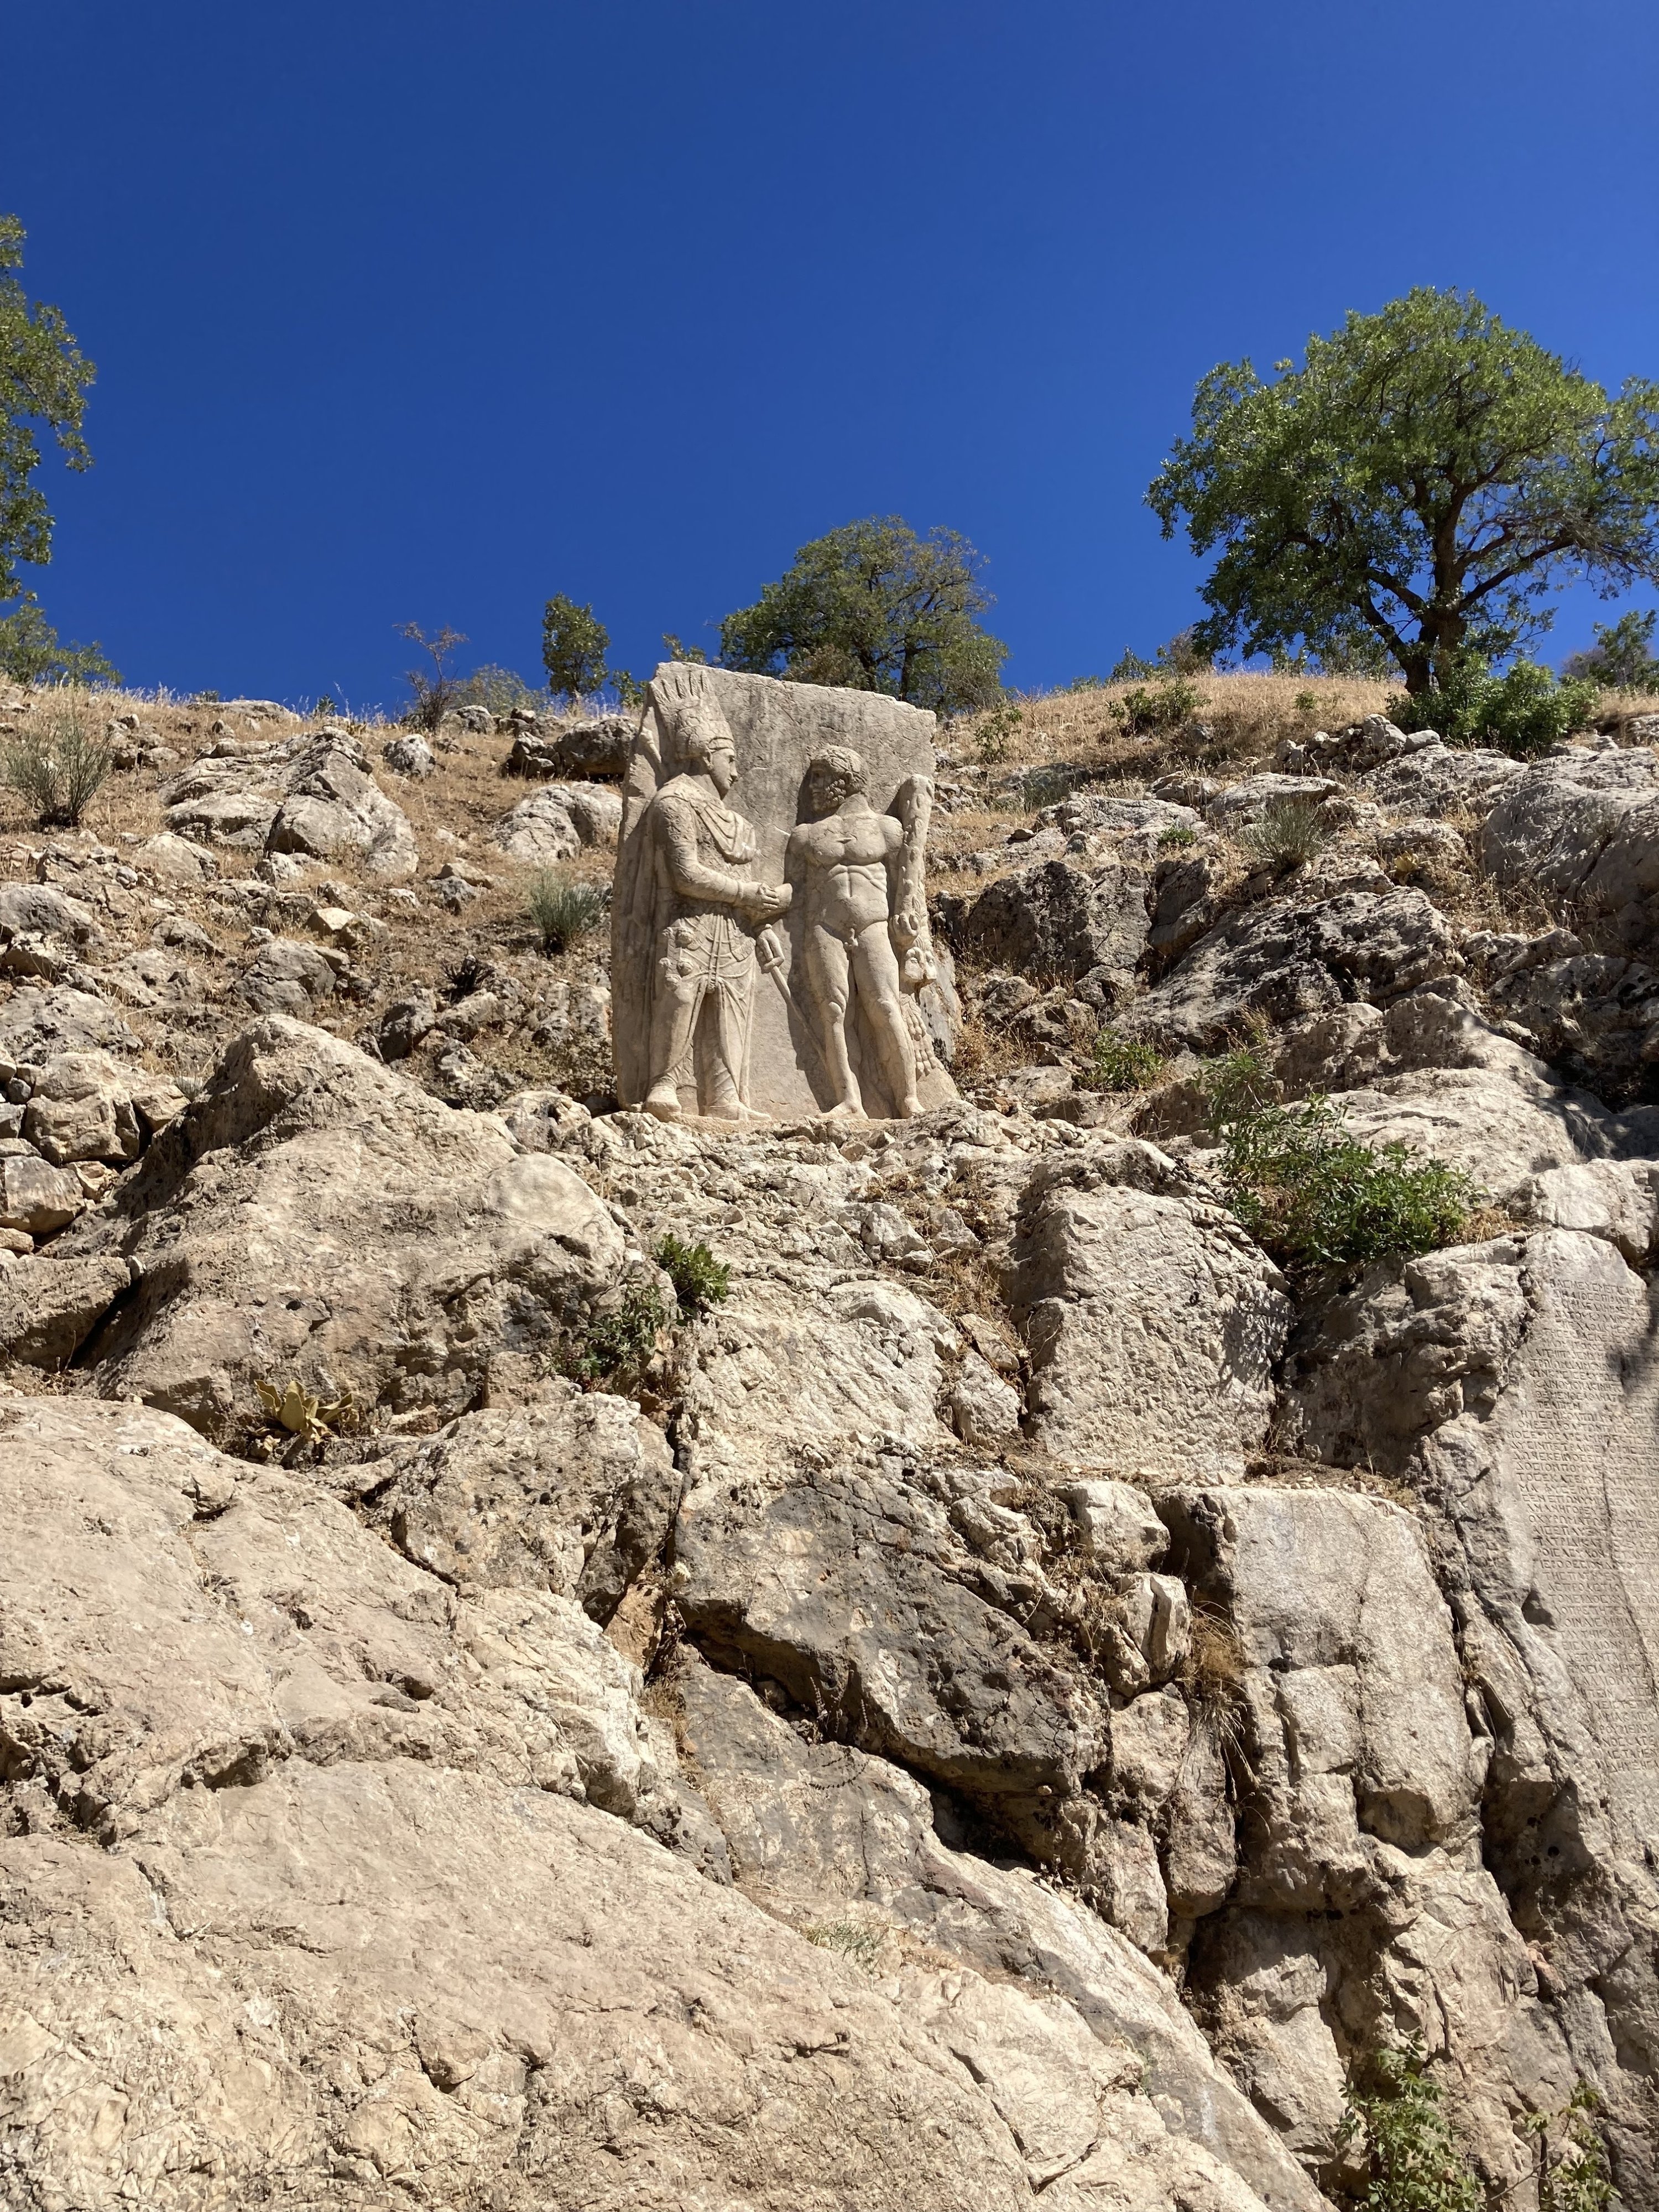 Arsameia, a sanctuary built by Antiochus I in honor of his father Mithridates, is home to a massive stele that depicts Antiochus shaking hands with Heracles, a reference to reconciliation between East and West, Adıyaman province, Türkiye. (dpa Photo)